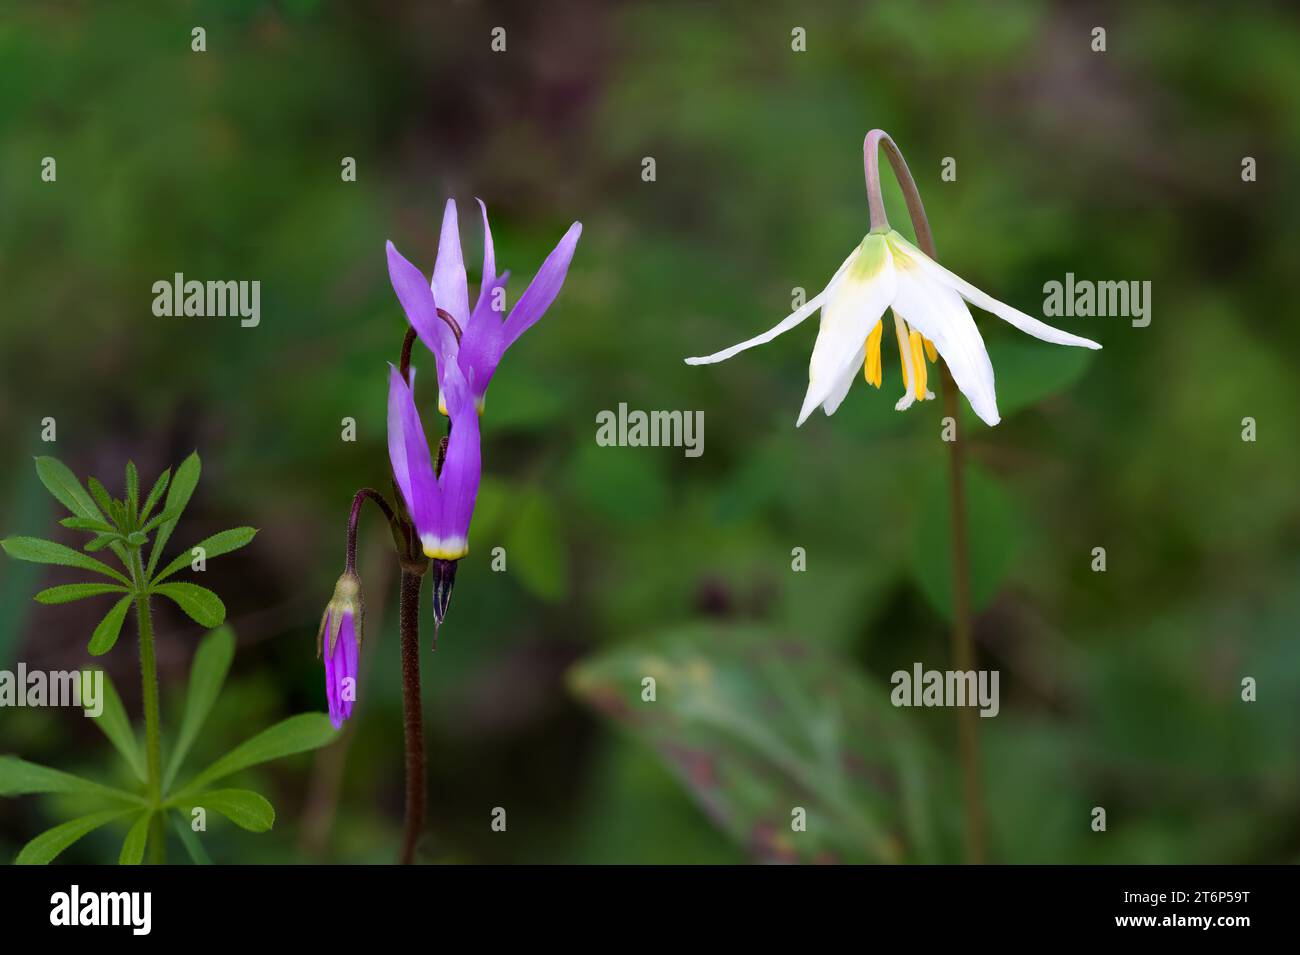 The Fawn Lily and Shooting Star wildflowers blooming in the Thetis Lake Regional Park, Vancouver Island, British Columbia, Canada. Stock Photo